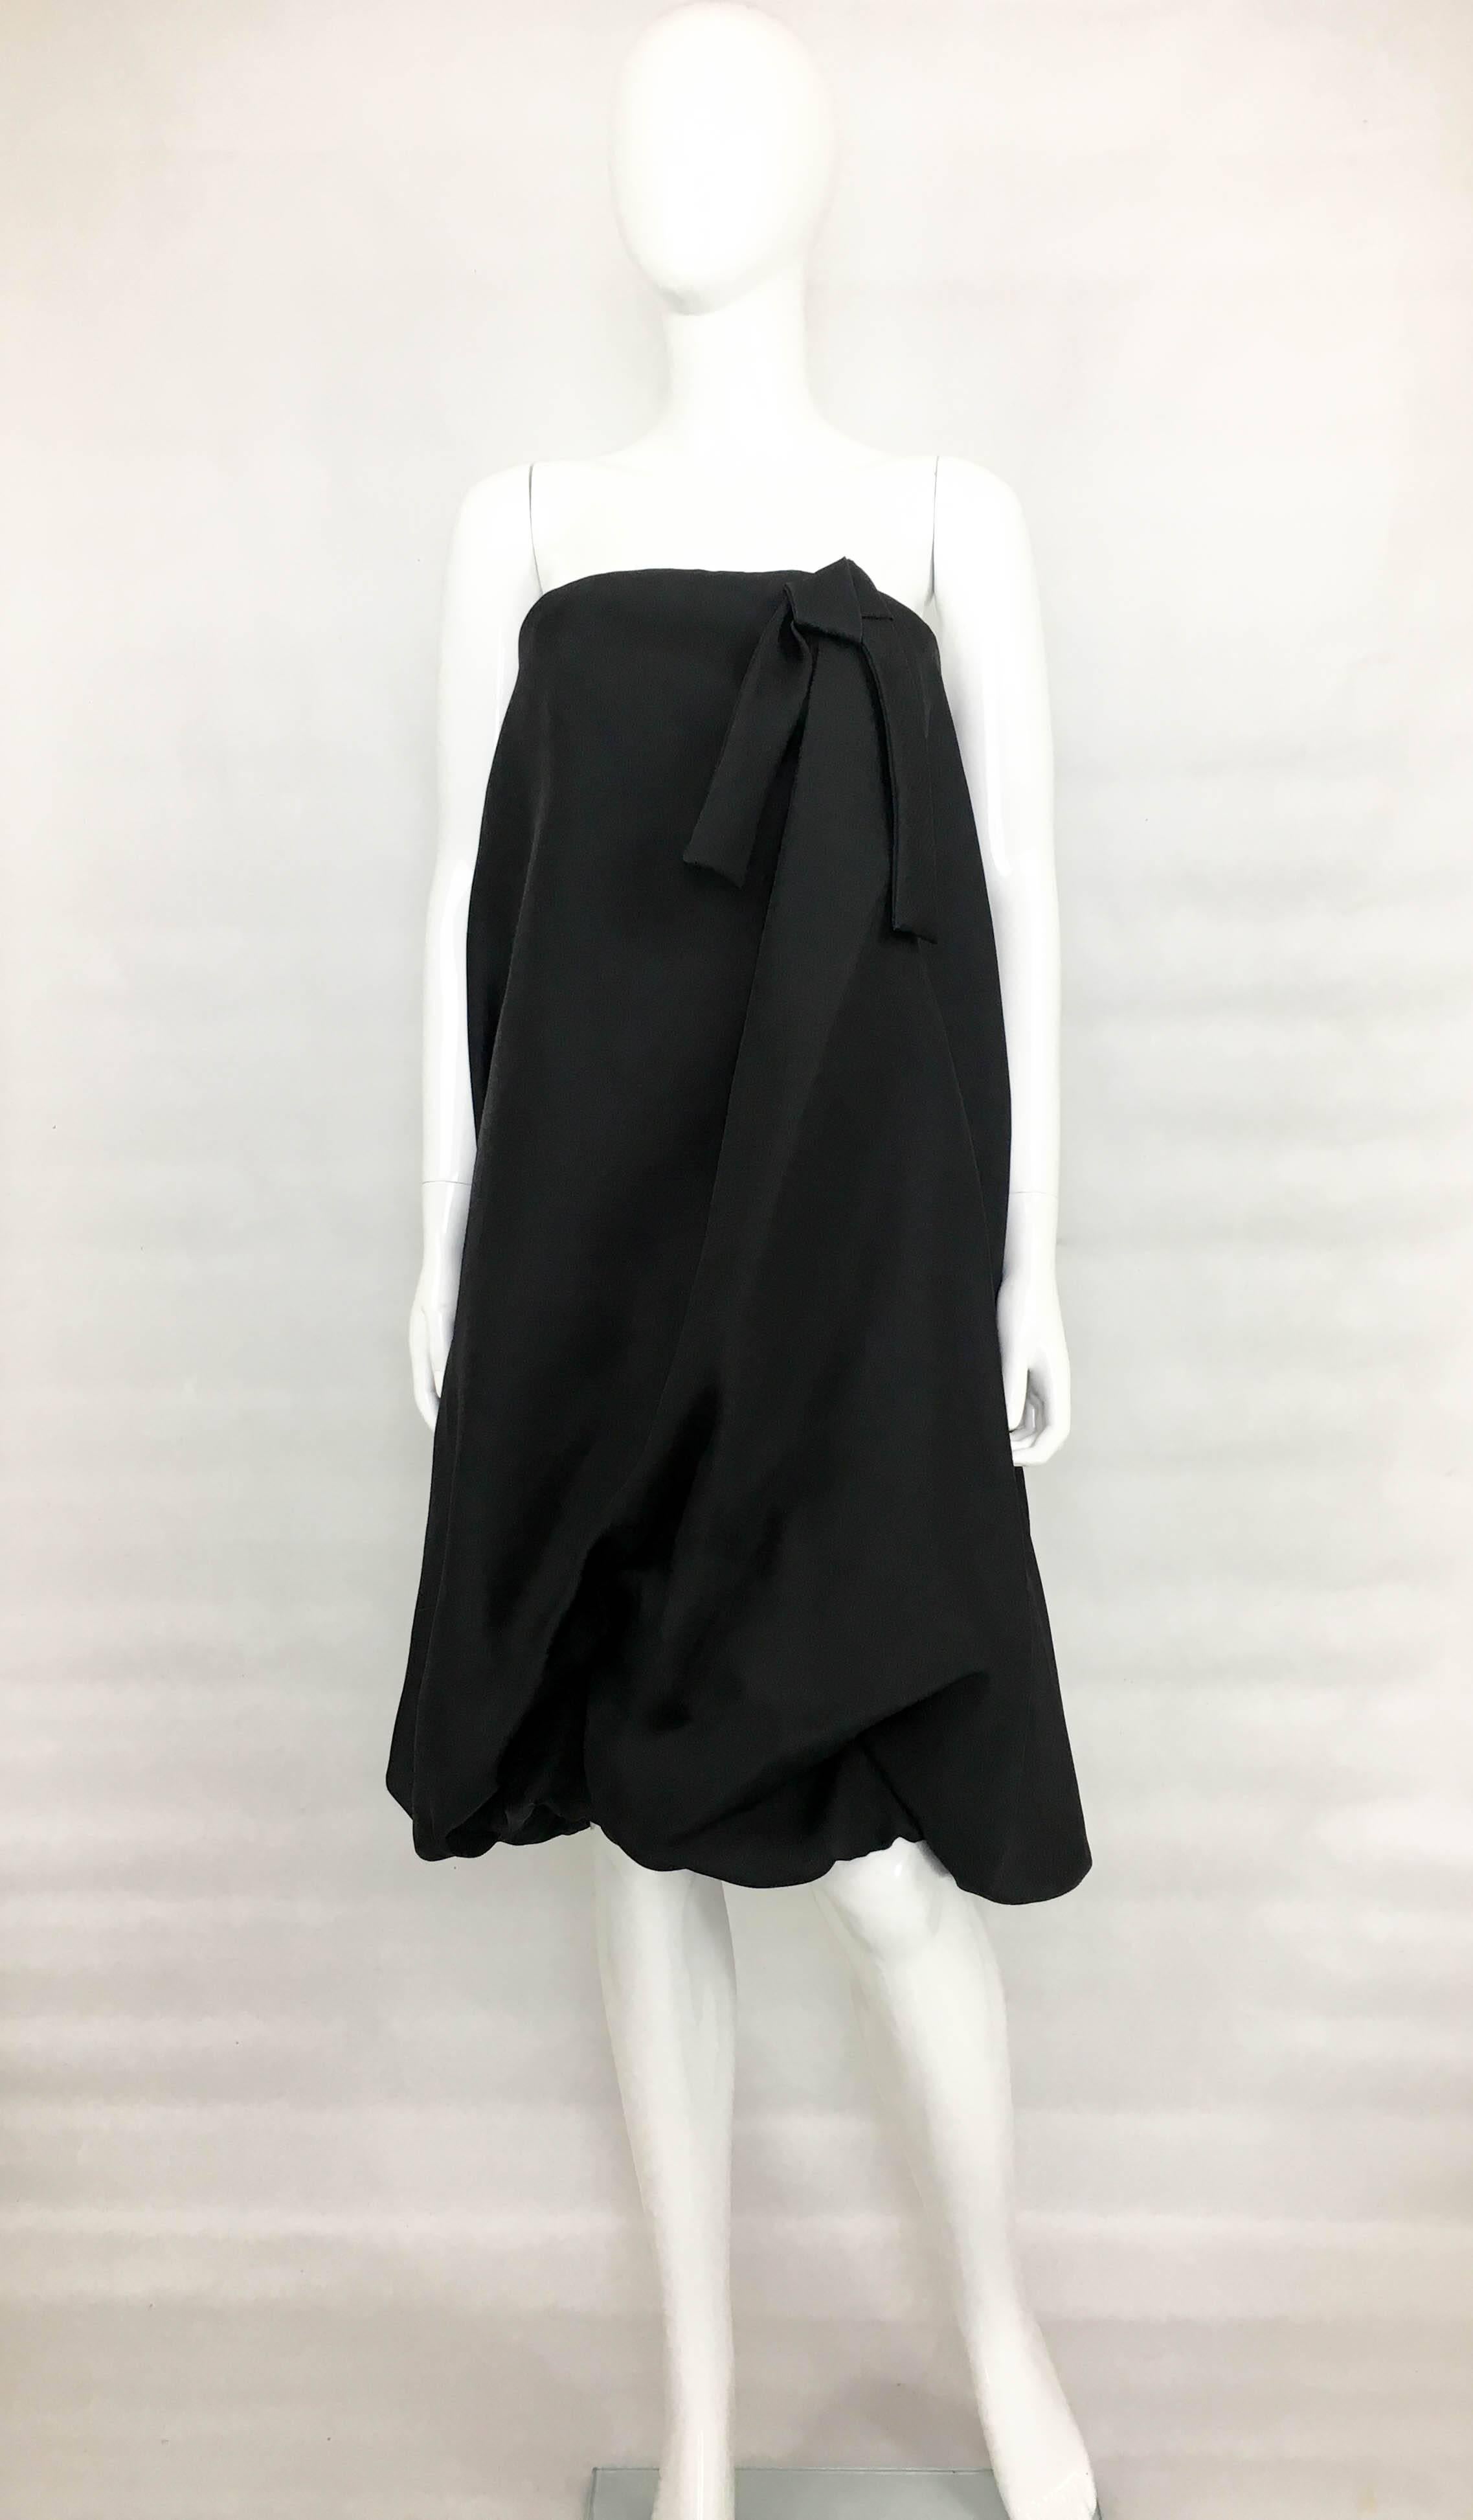 Important Vintage Balenciaga Black Gazar Cocktail Dress. This striking strapless dress by Balenciaga dates back from the late 1980’s. Made in black silk gazar, this hem-gathered balloon dress has an architectural and avantgarde silhouette. With